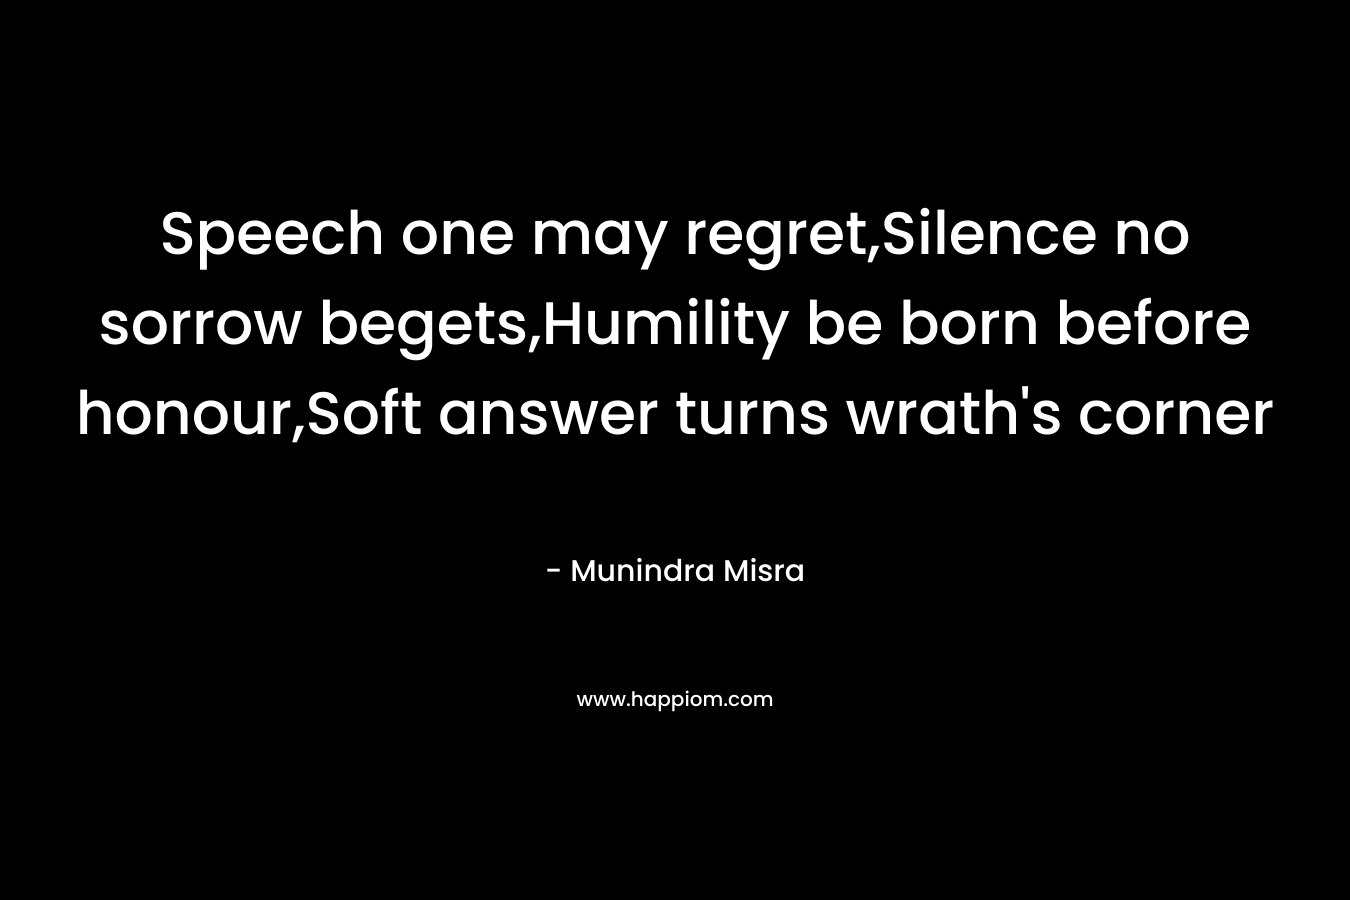 Speech one may regret,Silence no sorrow begets,Humility be born before honour,Soft answer turns wrath's corner